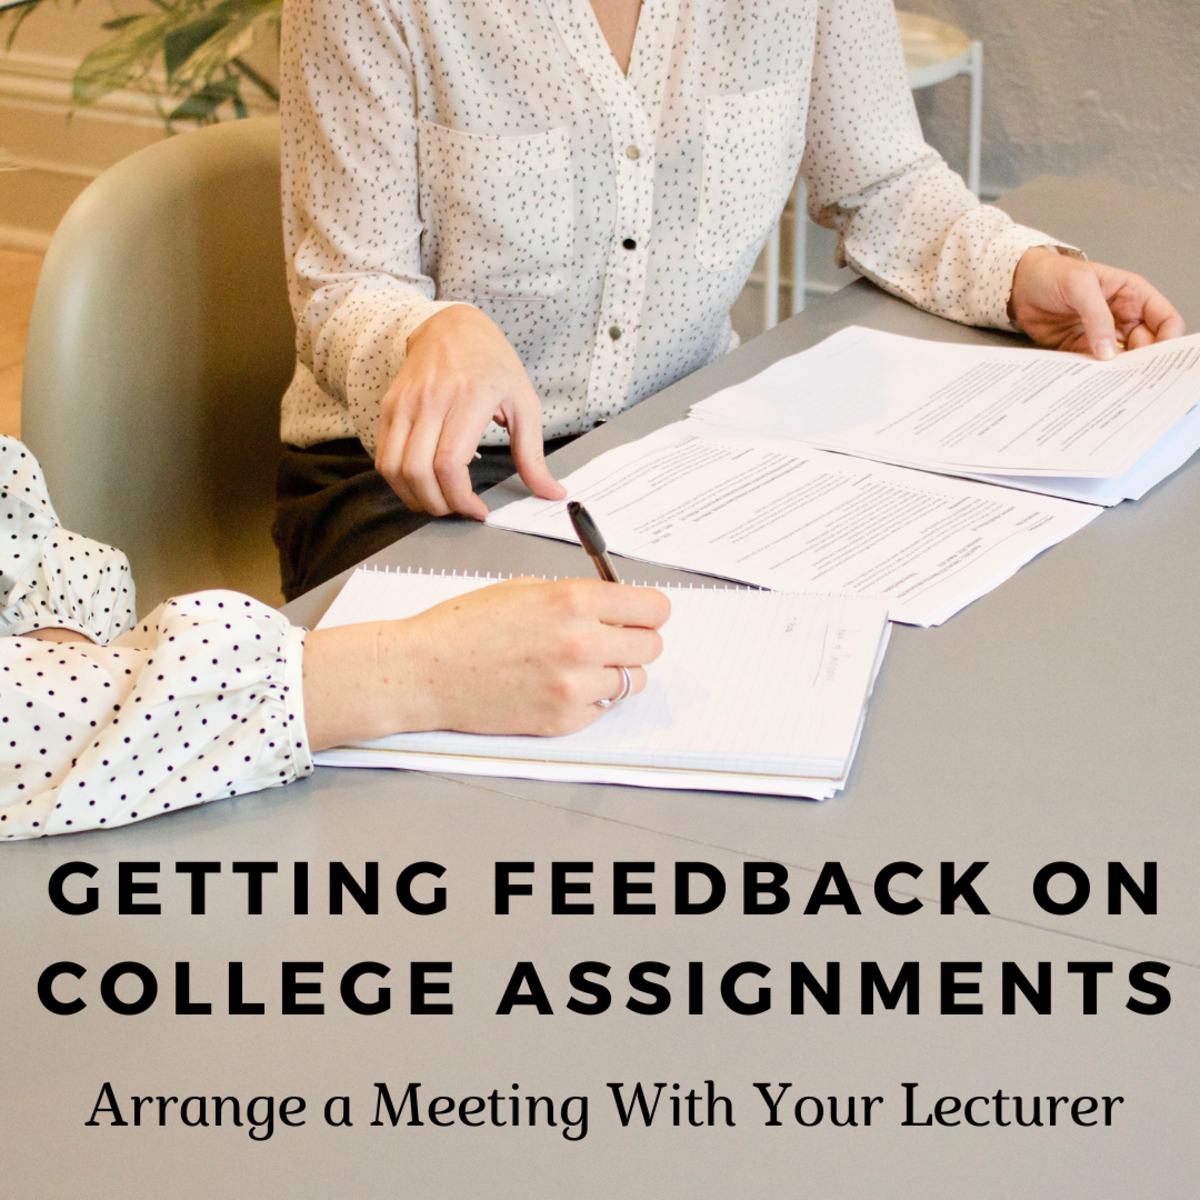 Set up a meeting with your lecturer to get feedback on your assignment.